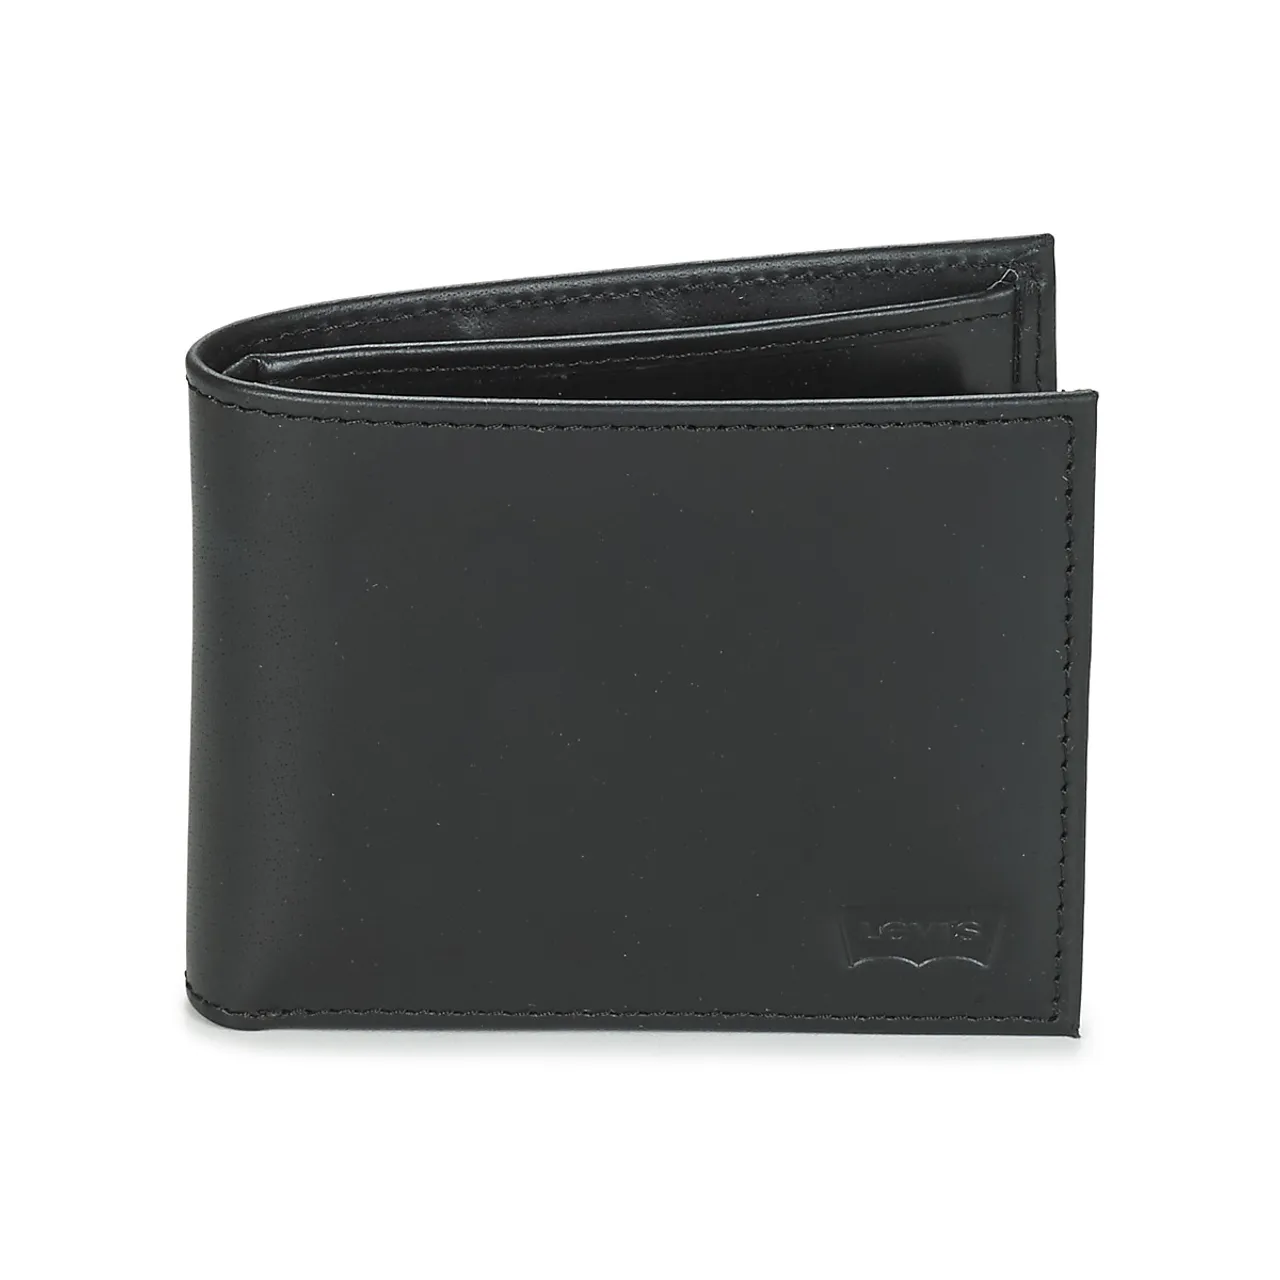 Levis  CASUAL CLASSICS HUNTER COIN BIFOLD  women's Purse wallet in Black